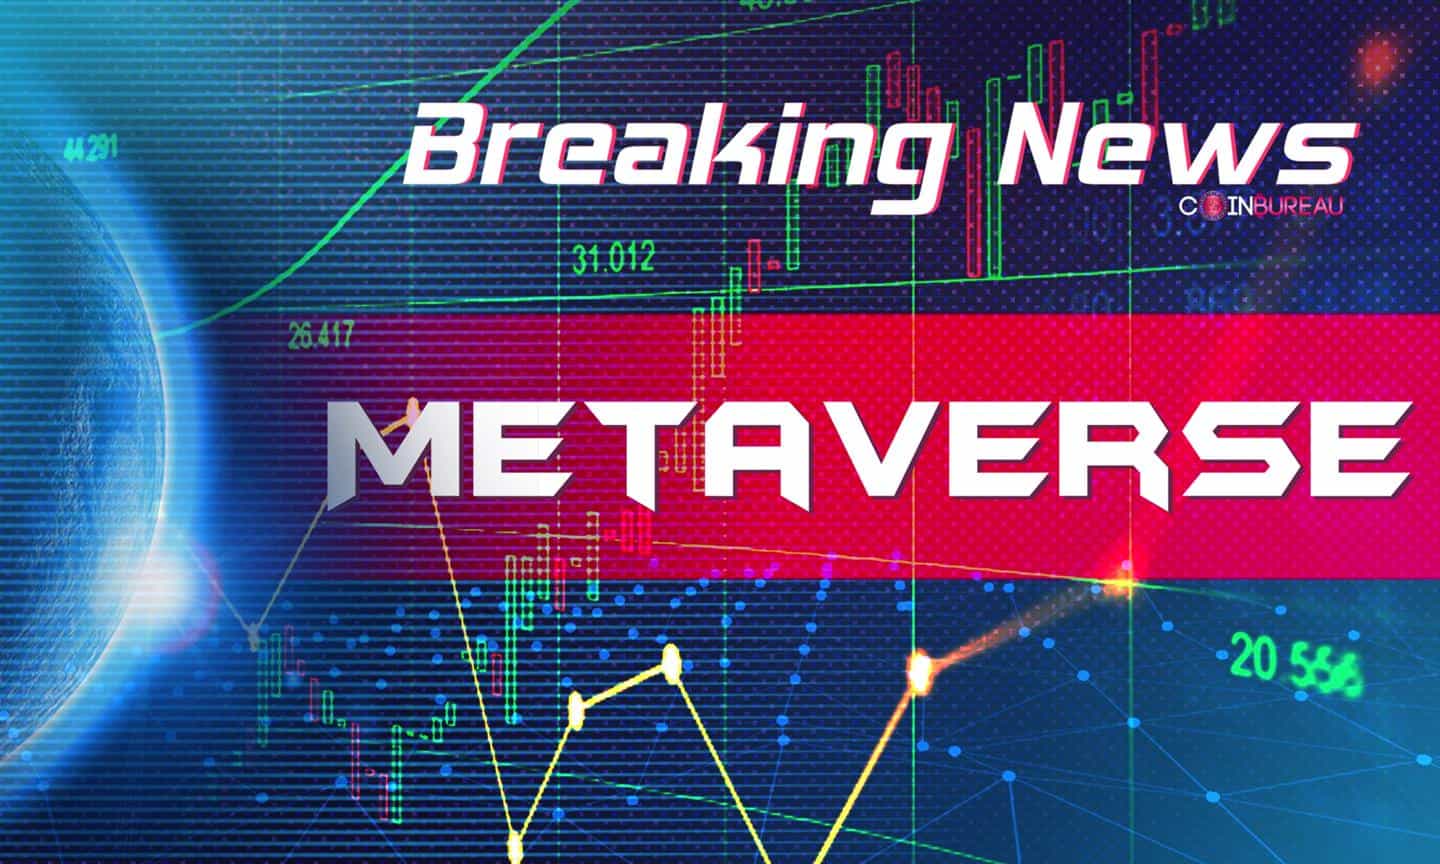 Crypto Giant Grayscale: Metaverse $1 Trillion in Opportunities